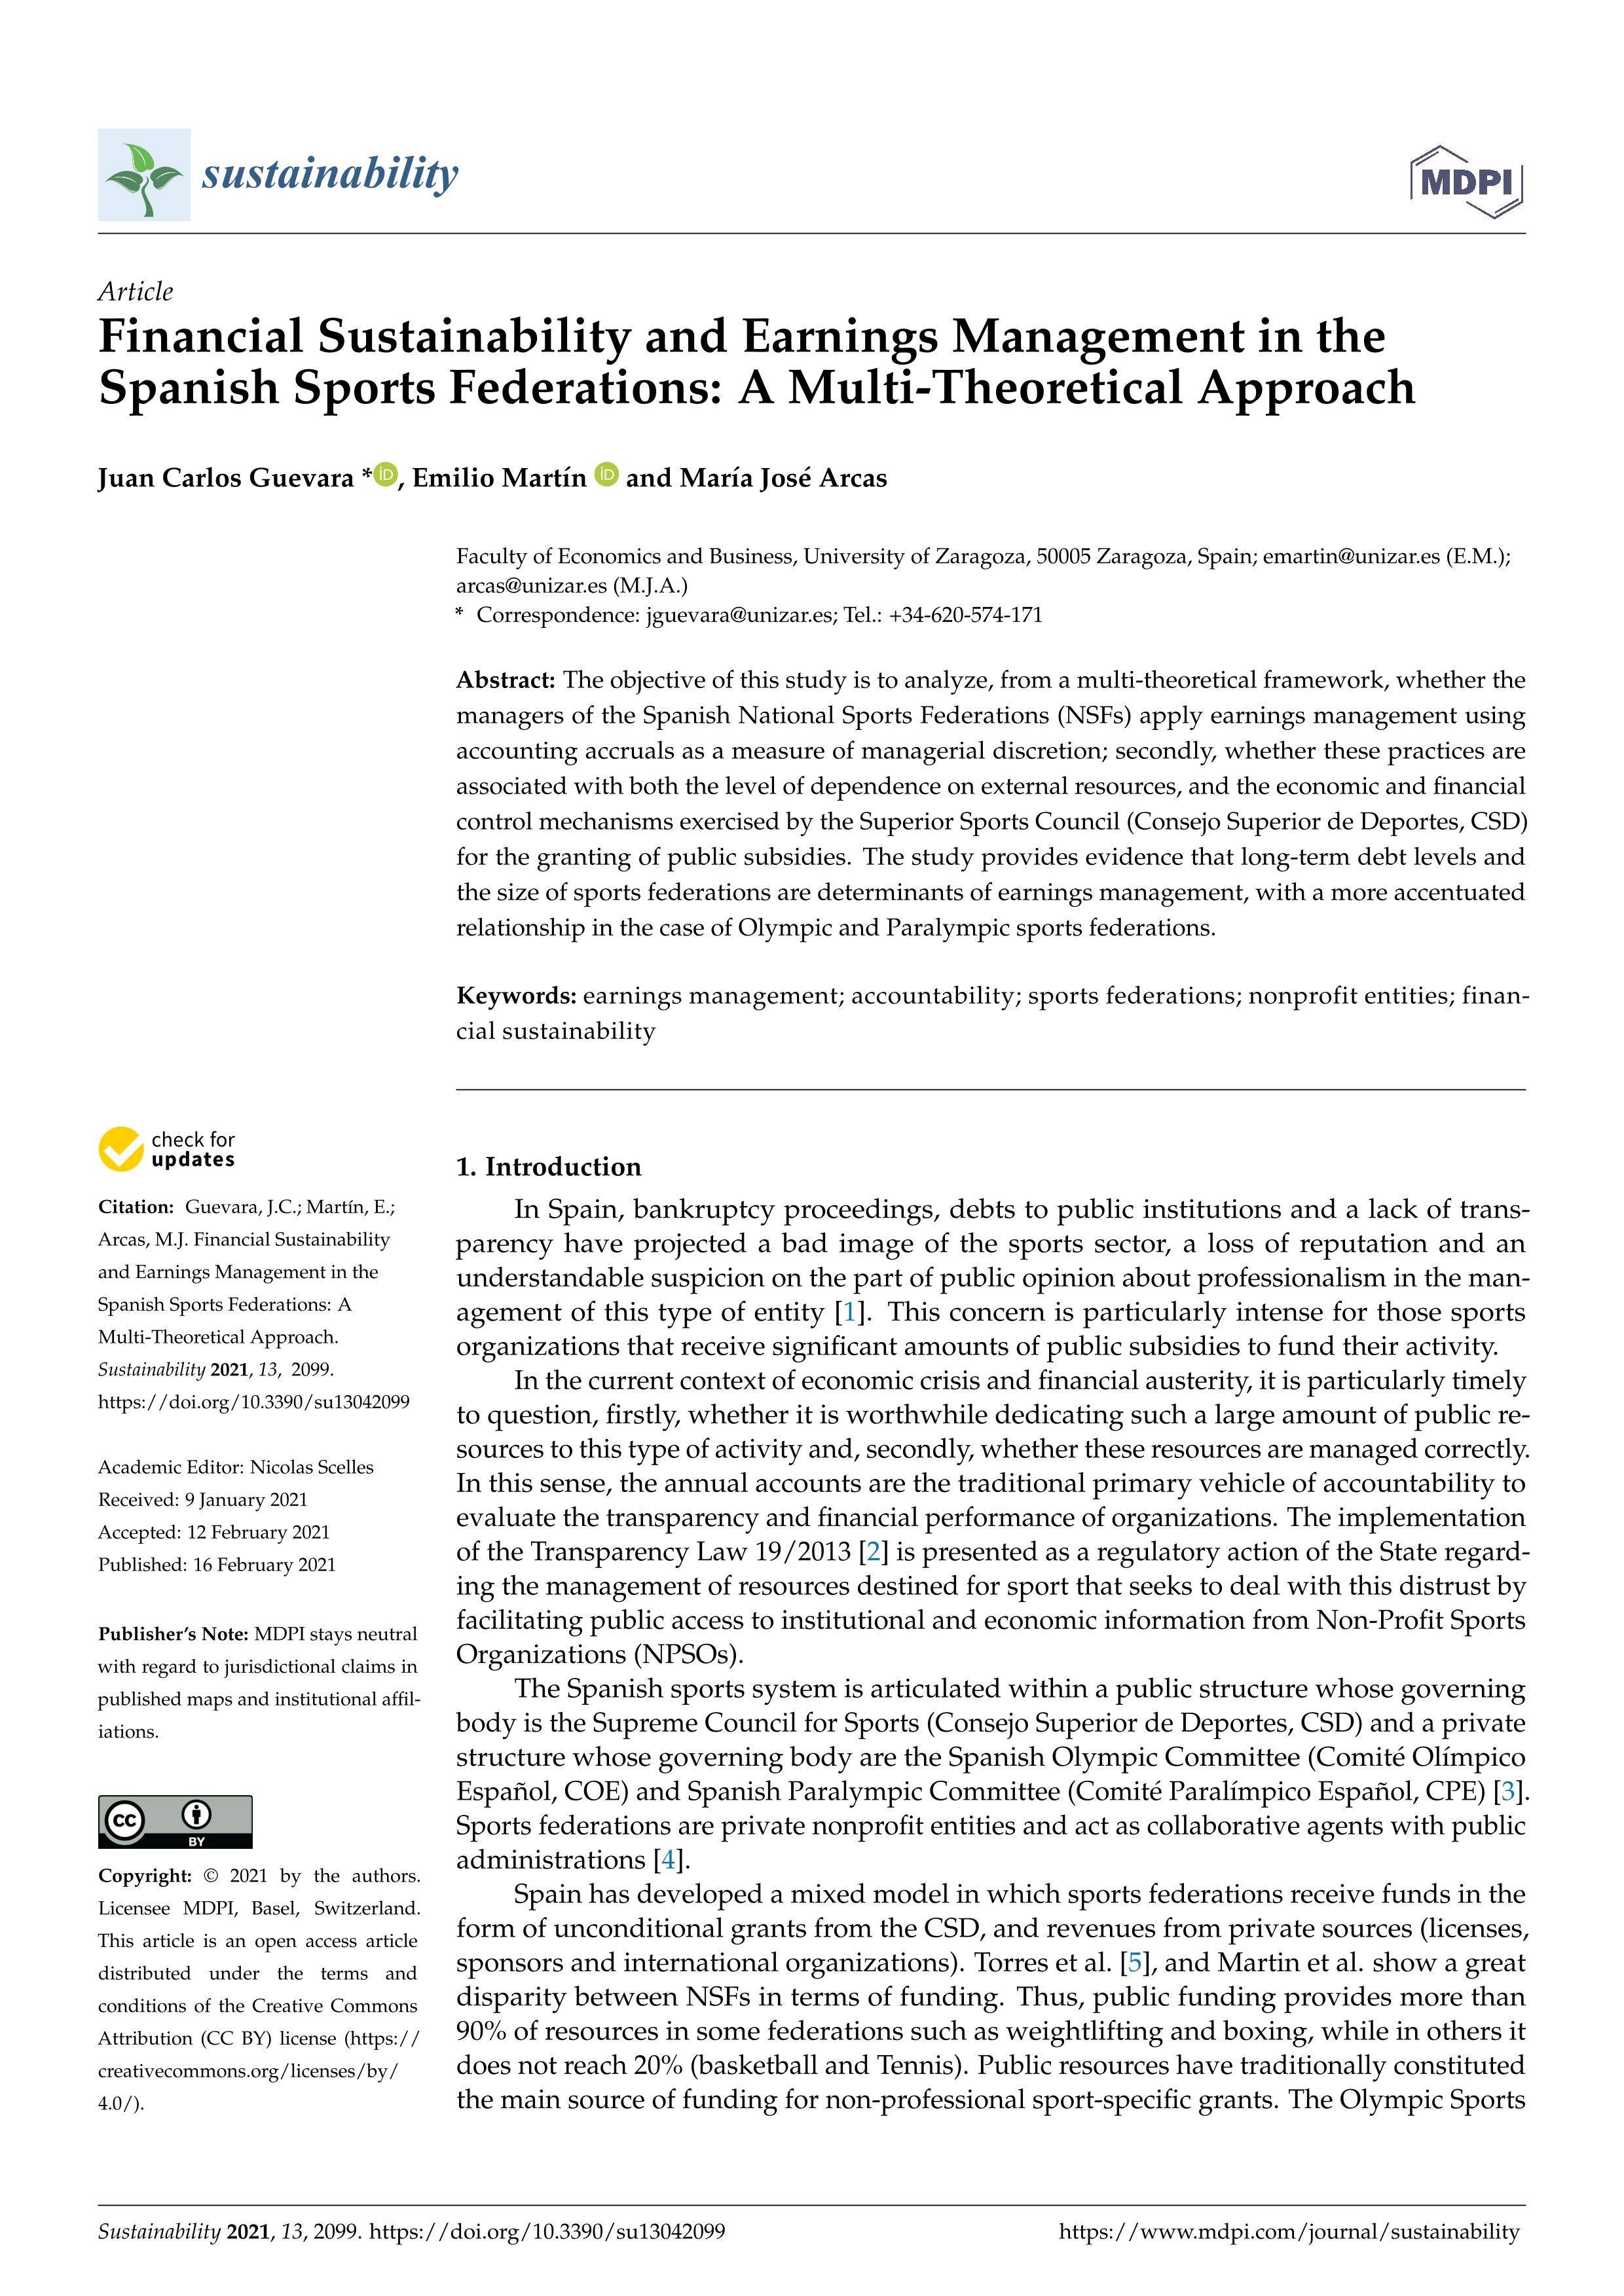 Financial sustainability and earnings management in the Spanish Sports Federations: A multi-theoretical approach